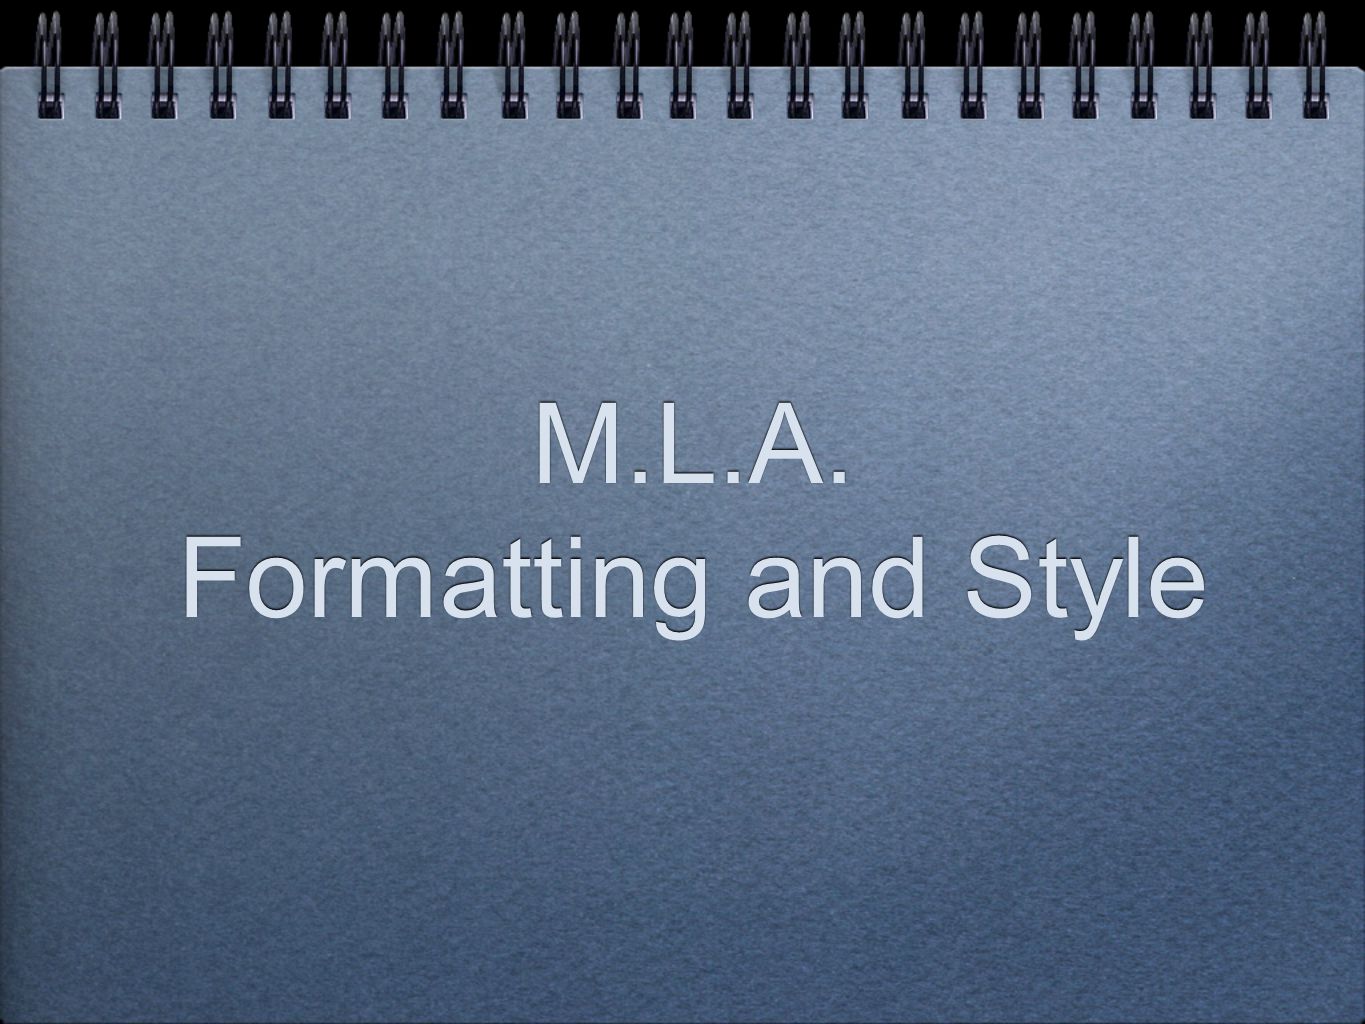 M.L.A. Formatting and Style